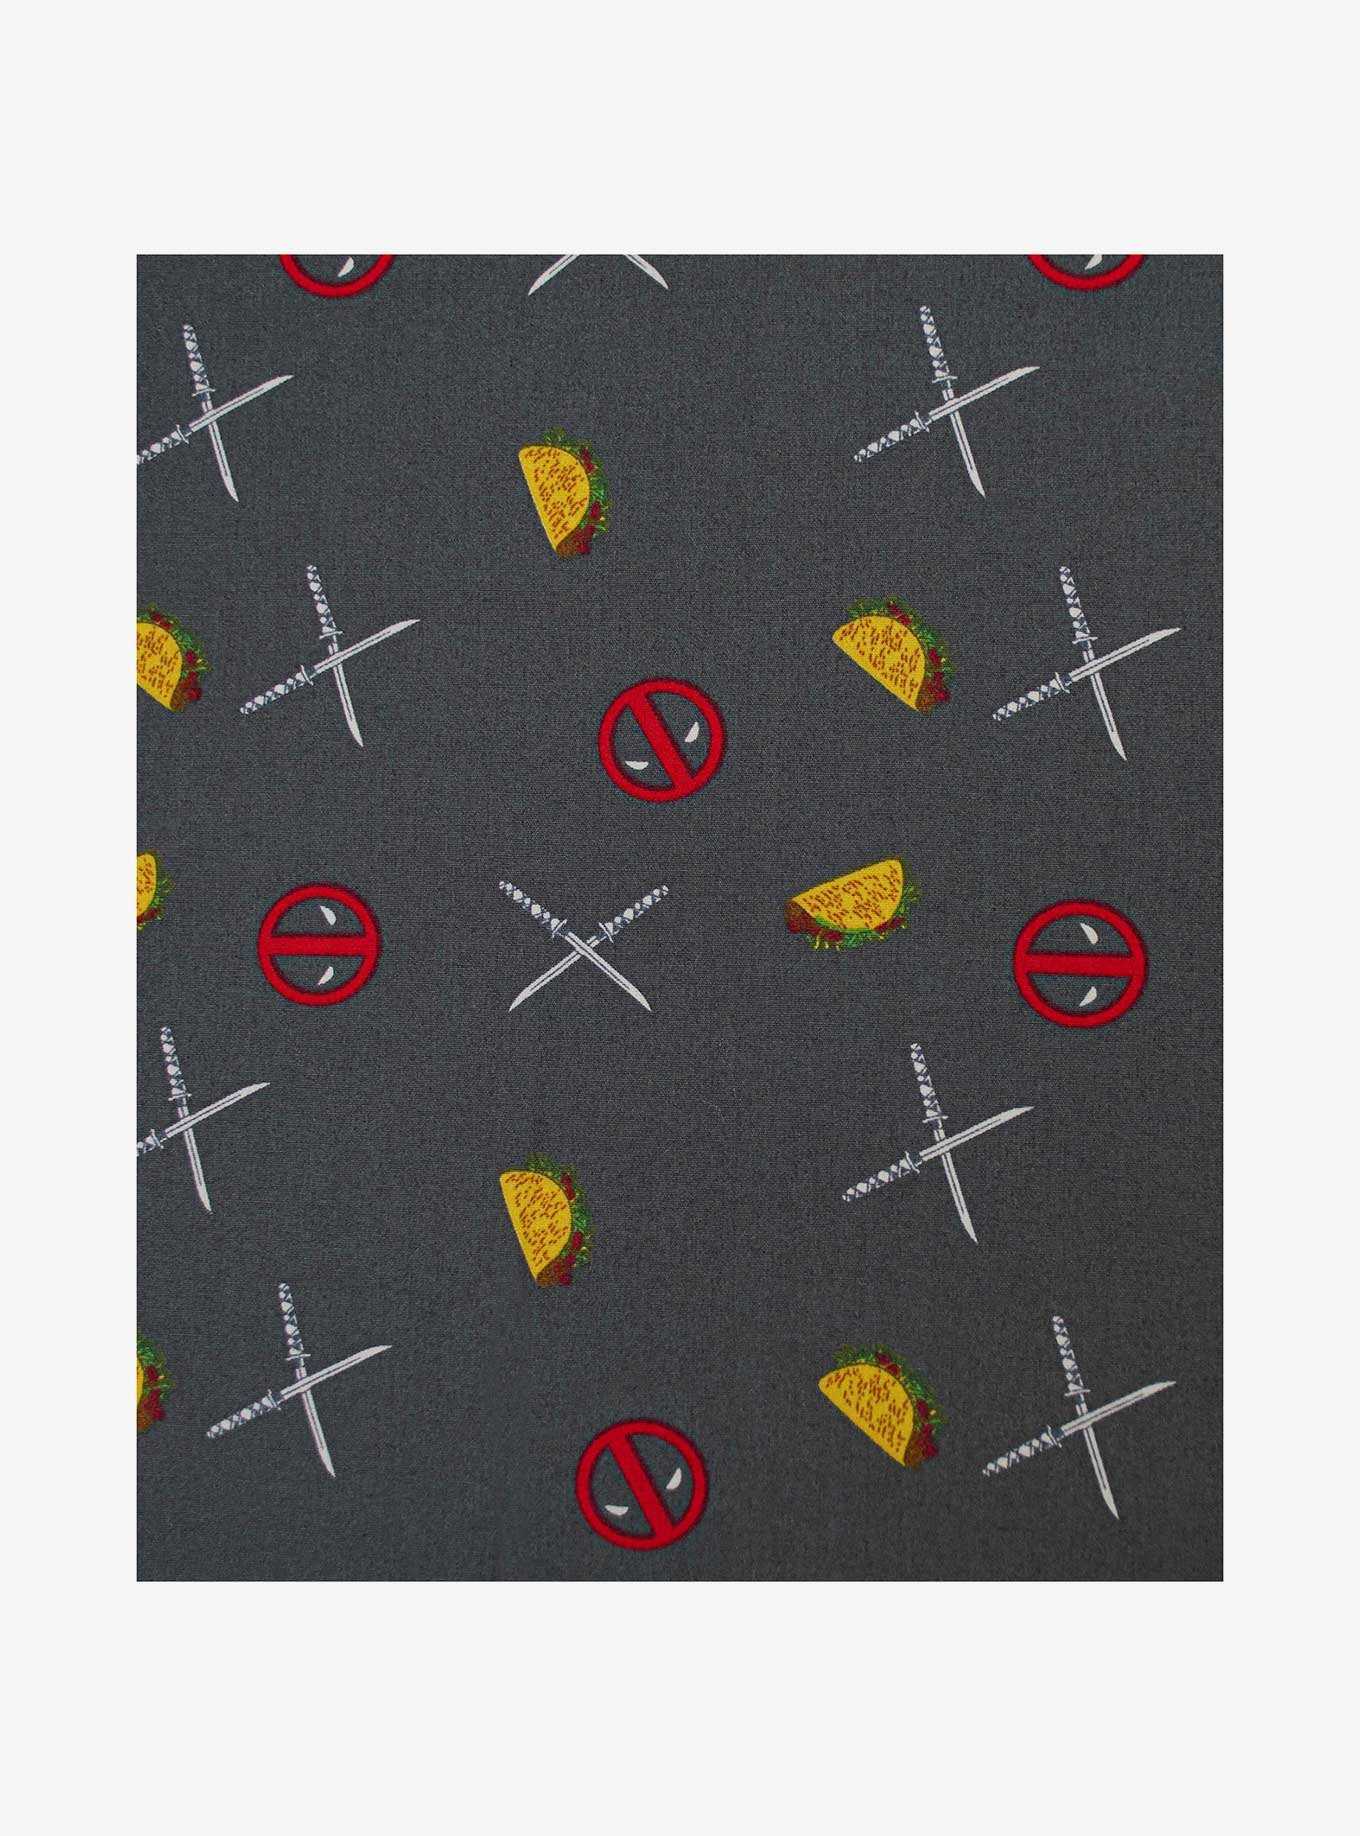 Marvel Deadpool Taco Party Woven Button-Up, , hi-res